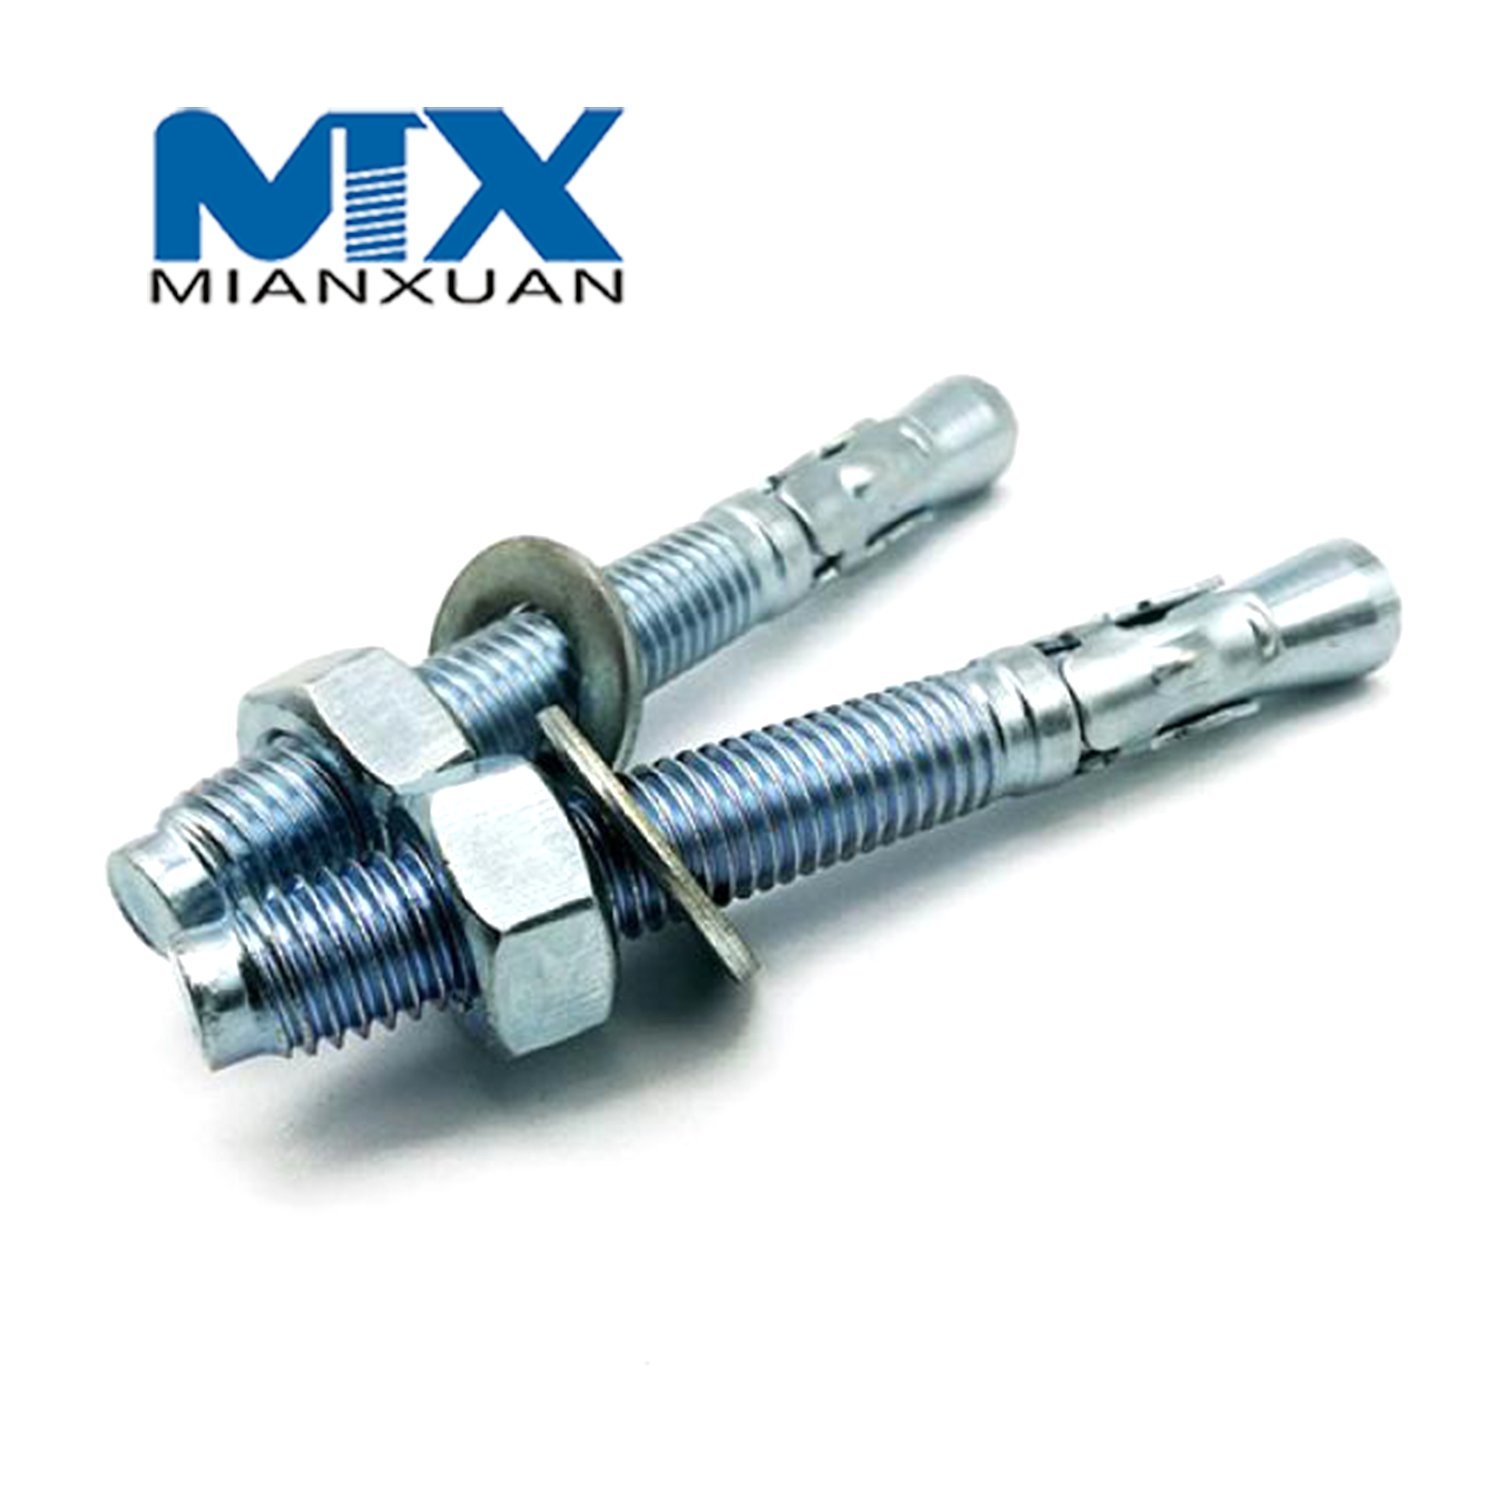 Stainless Steel Expansion Bolt for Carriage Hex U Through Wedge Anchor Fastener